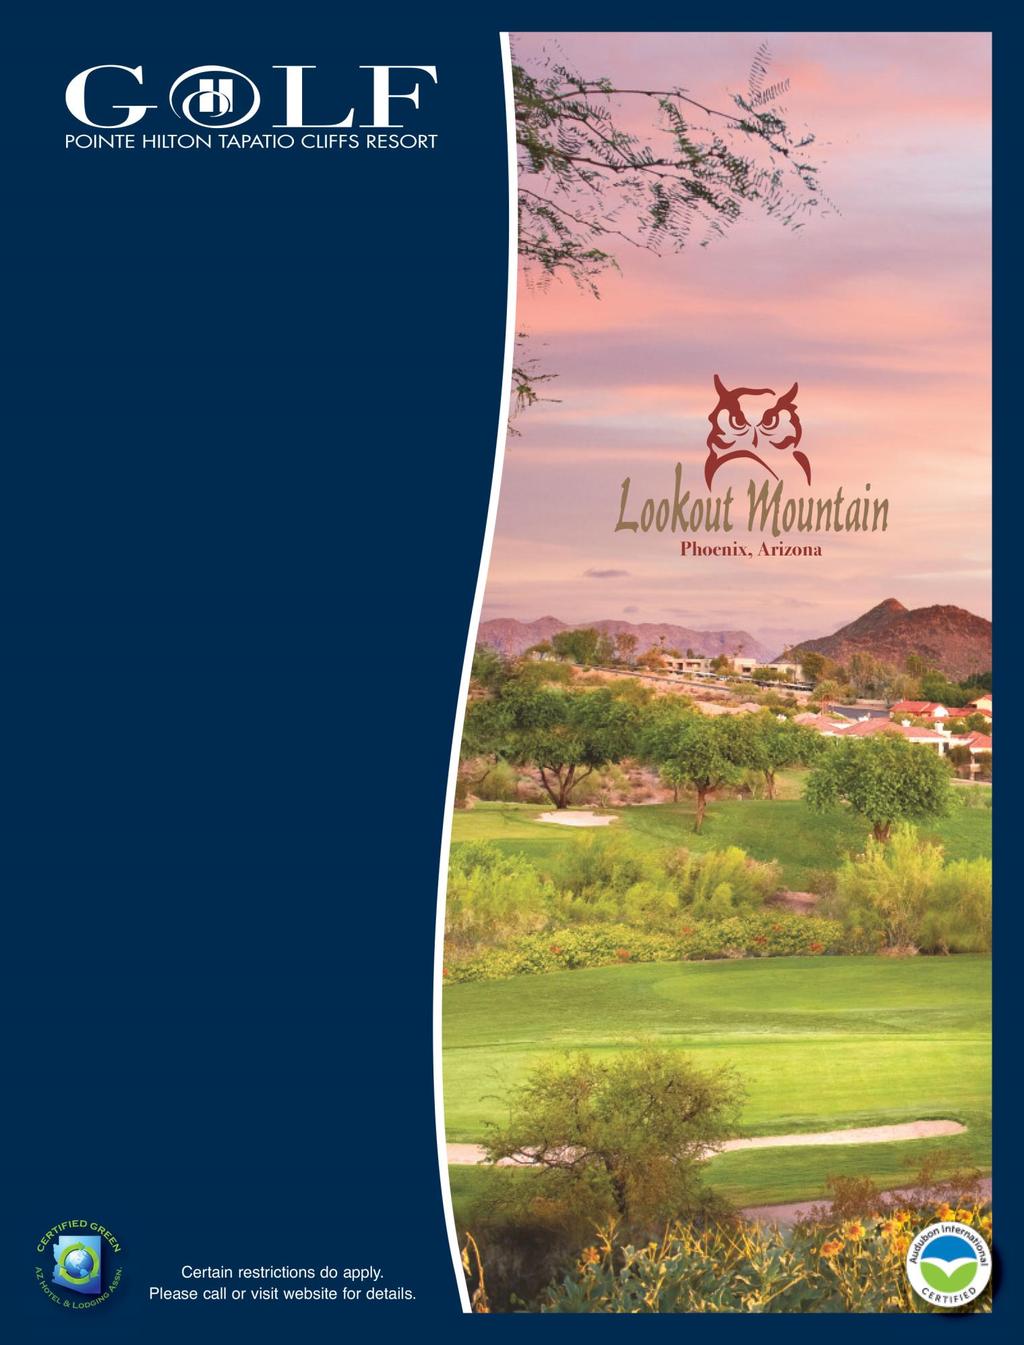 Join The Lookout Mountain Players Club Discount golf programs starting at $99. Full Access Programs starting at $4,295. Benefits include: 1.